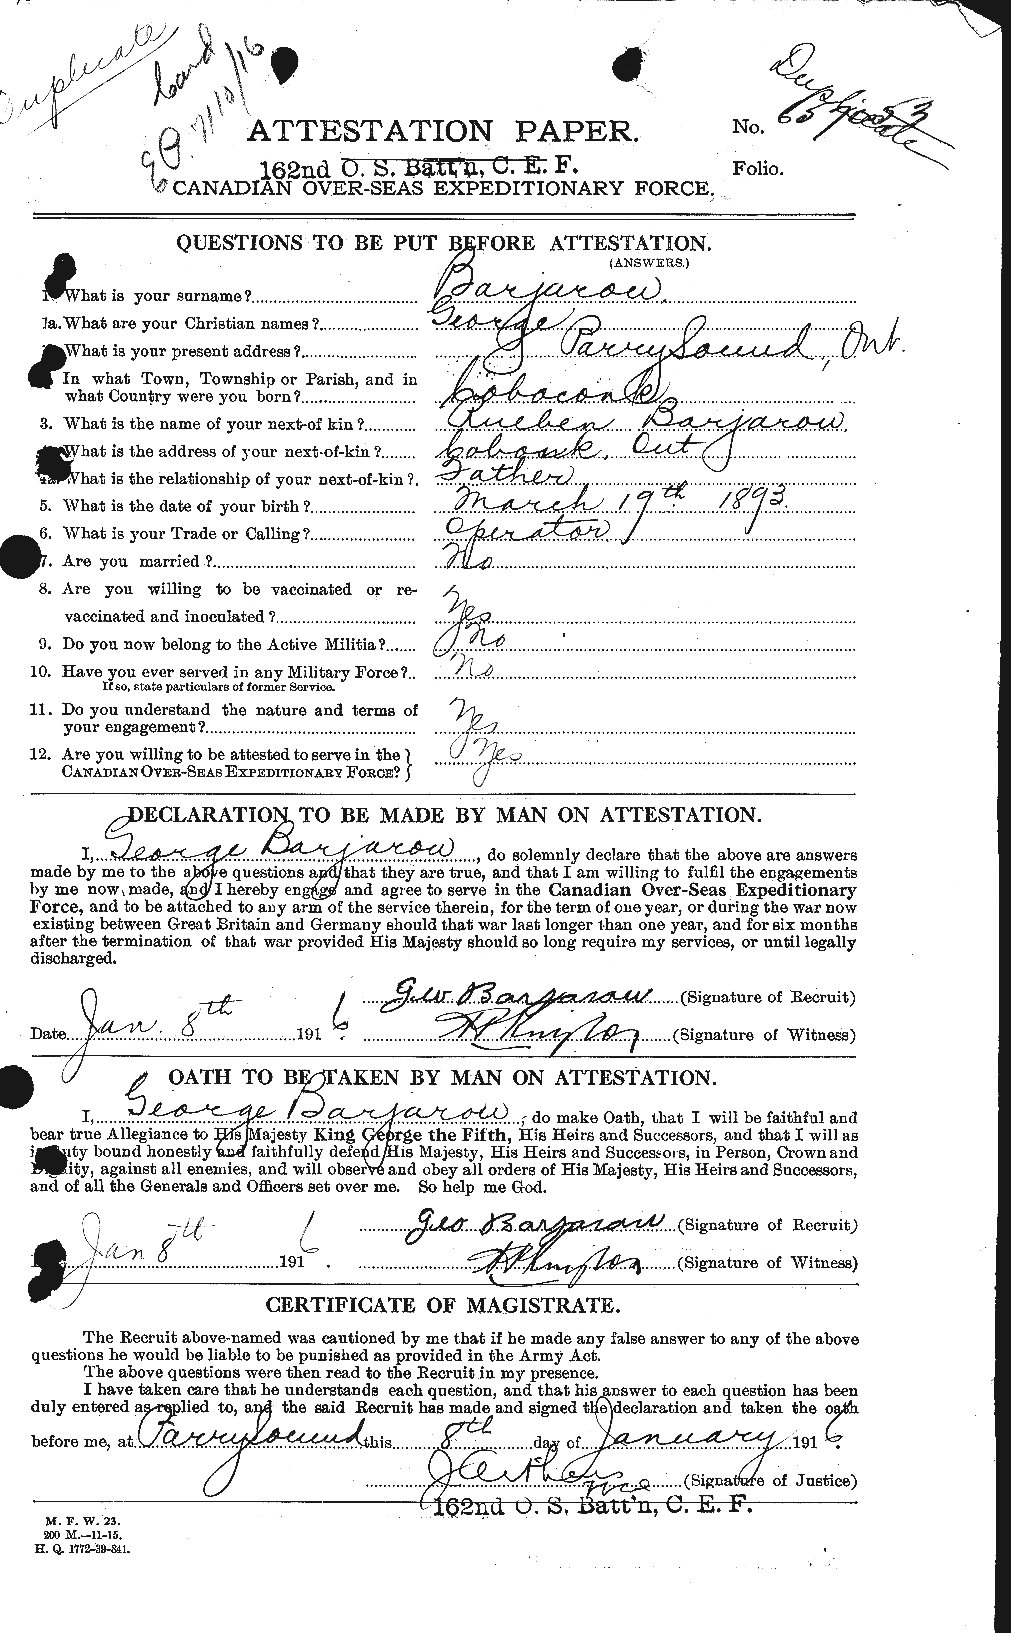 Personnel Records of the First World War - CEF 220623a